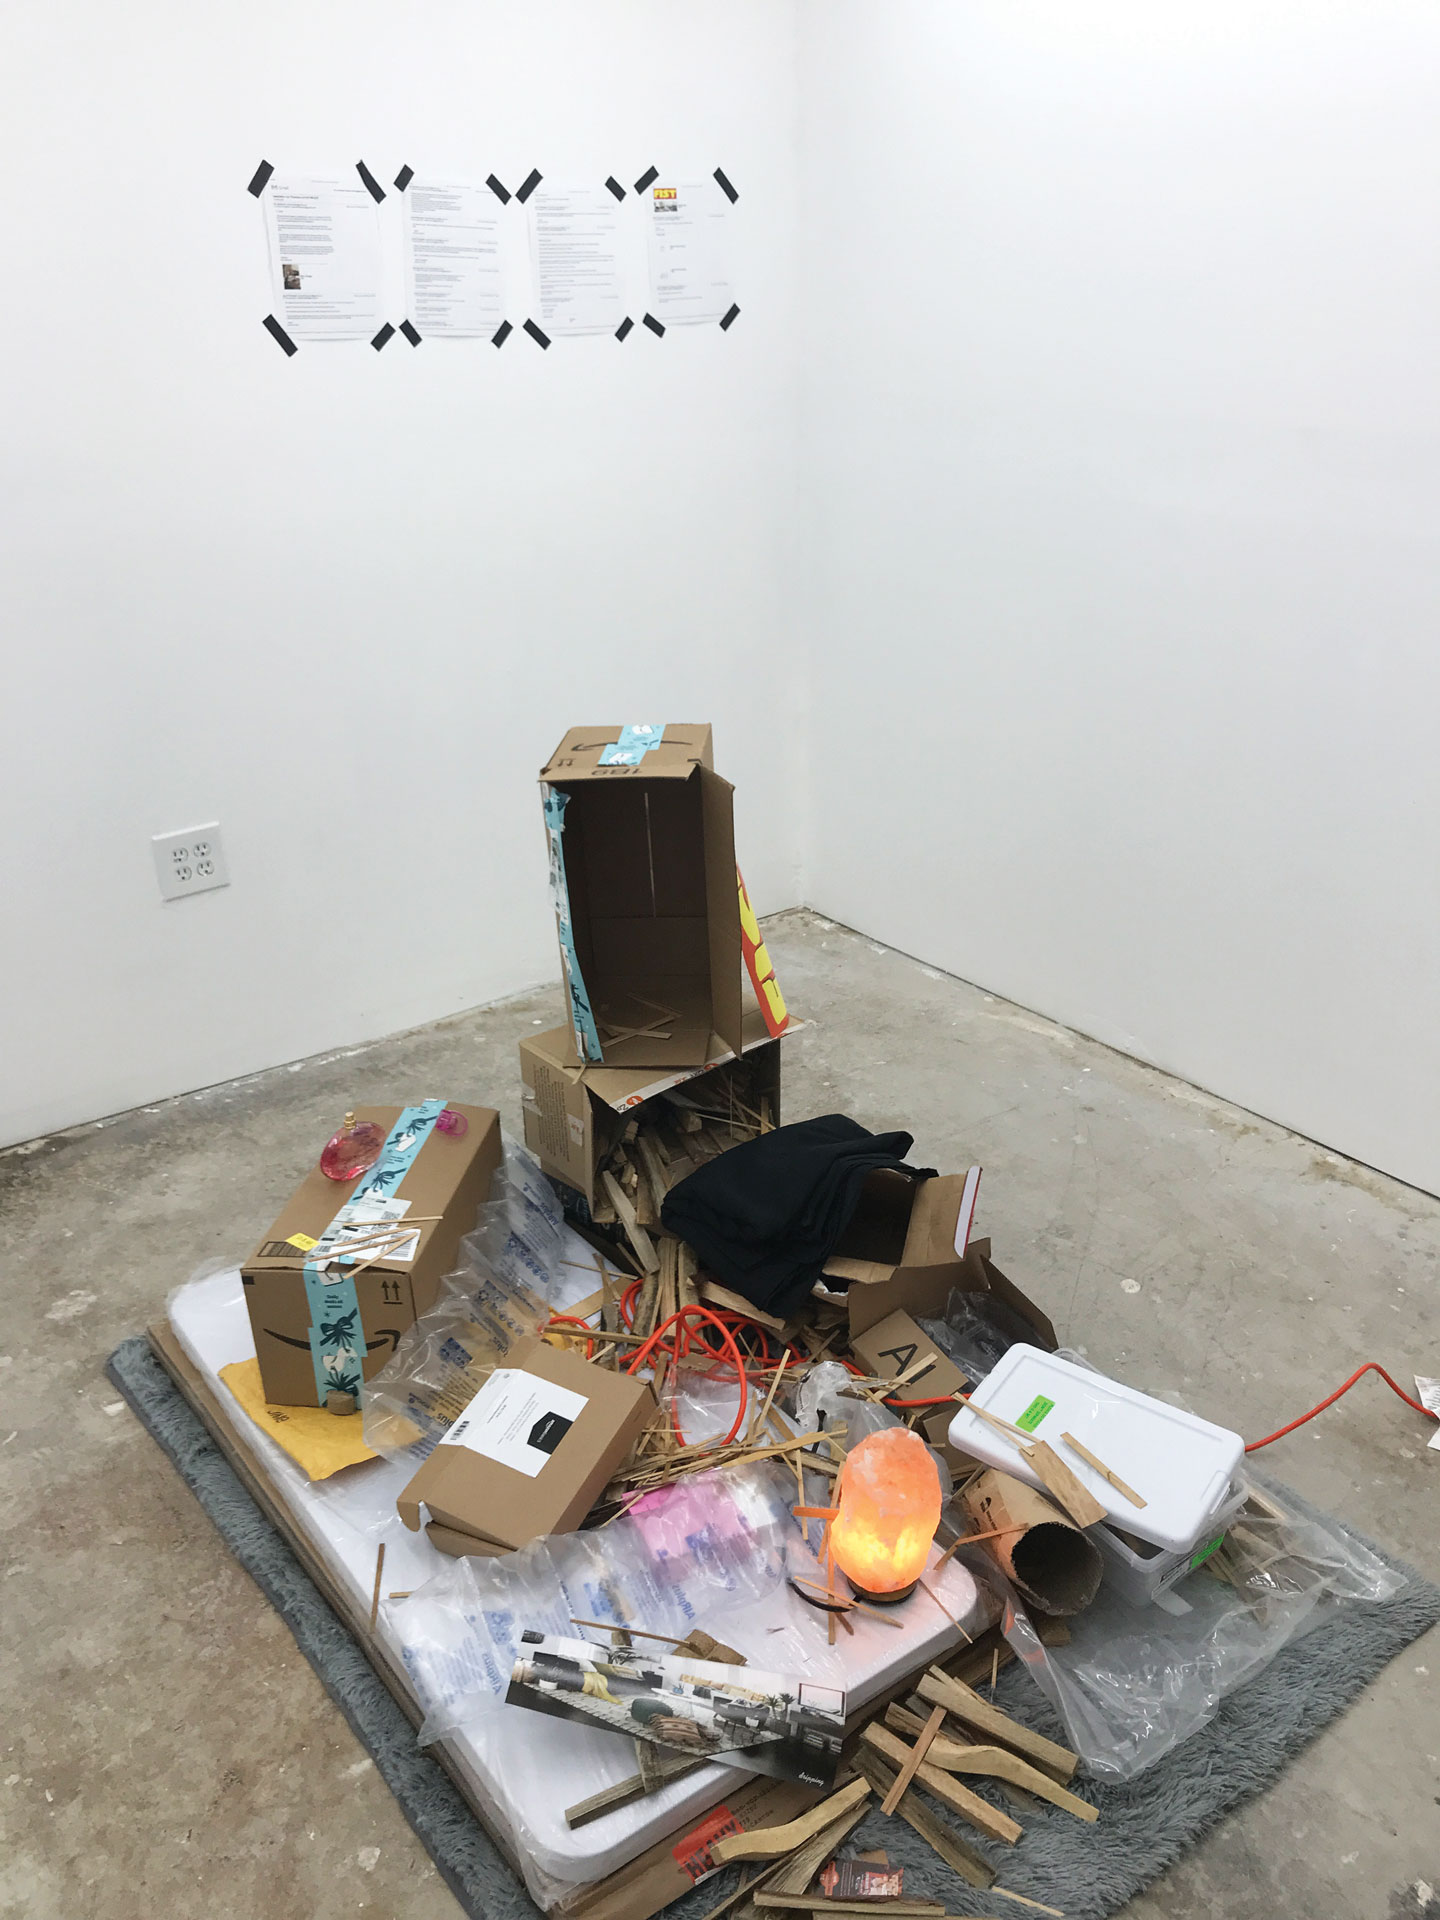 Jacob Thompson, My Amazon Journey Boxes / From Heaven, 2020, installed at the_openroom